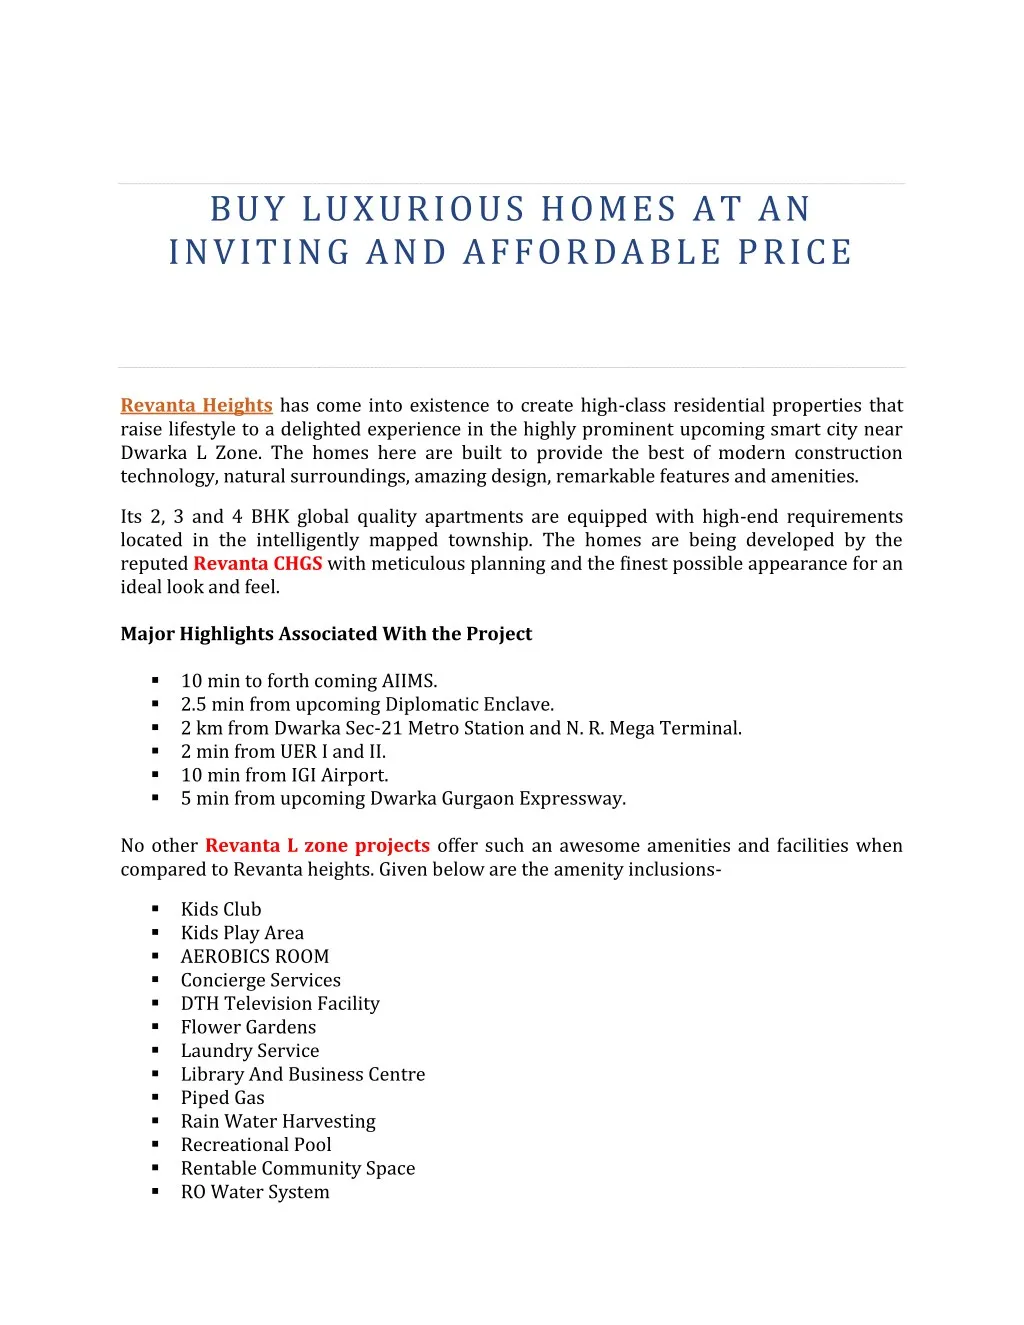 buy luxurious homes at an inviting and affordable